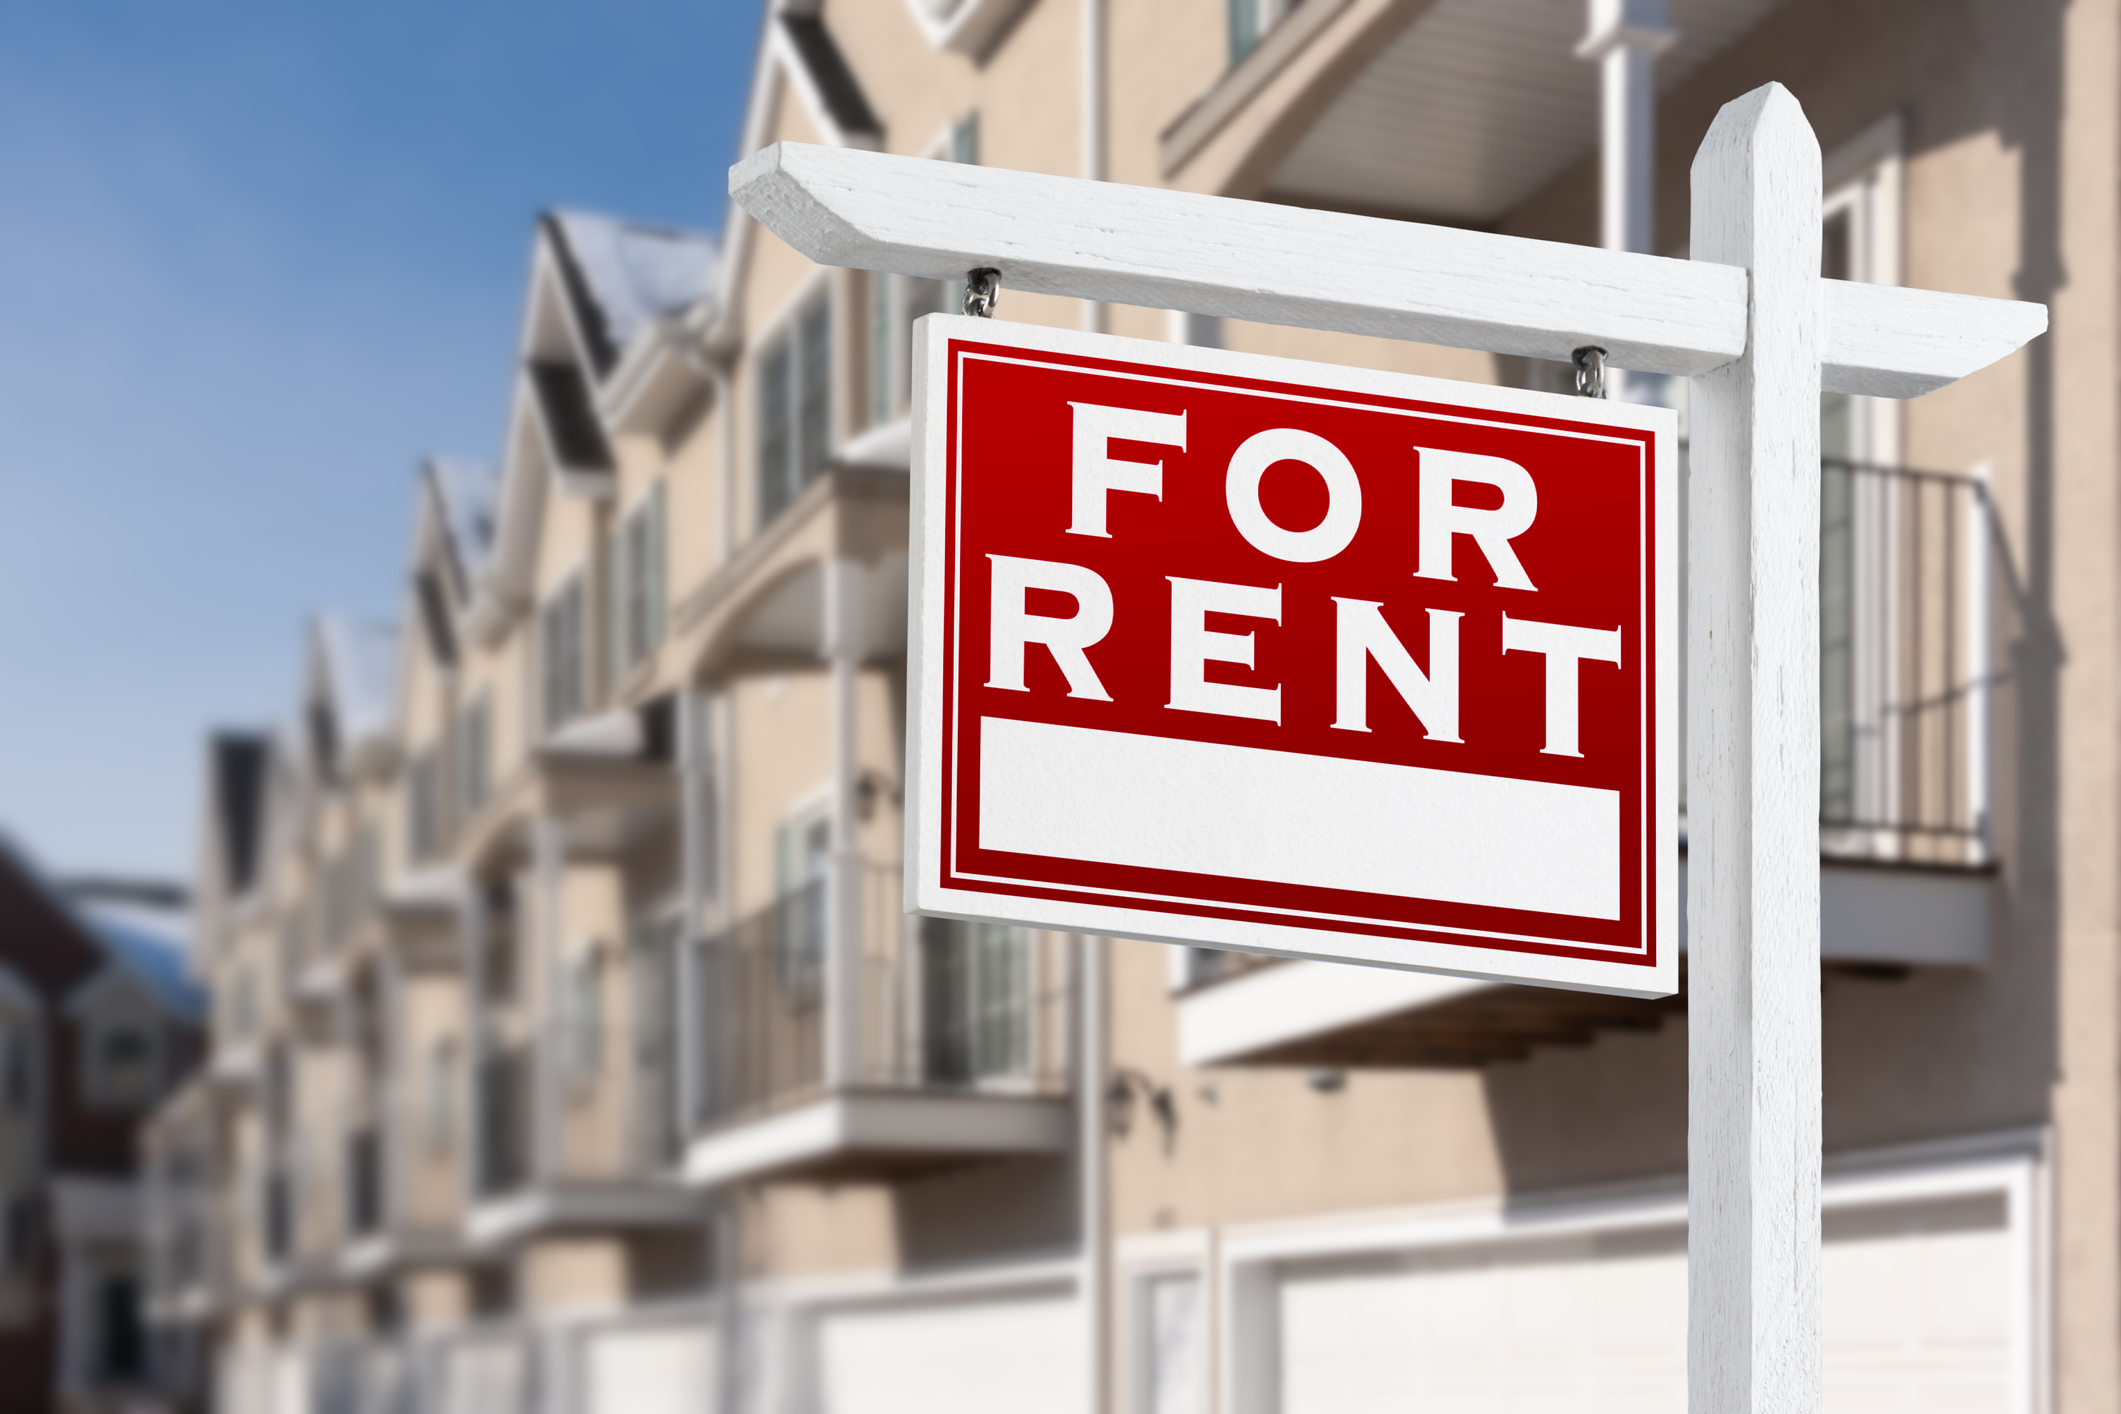 THE RENTAL MARKET AND A $2.1 TRILLION HOUSING GAP